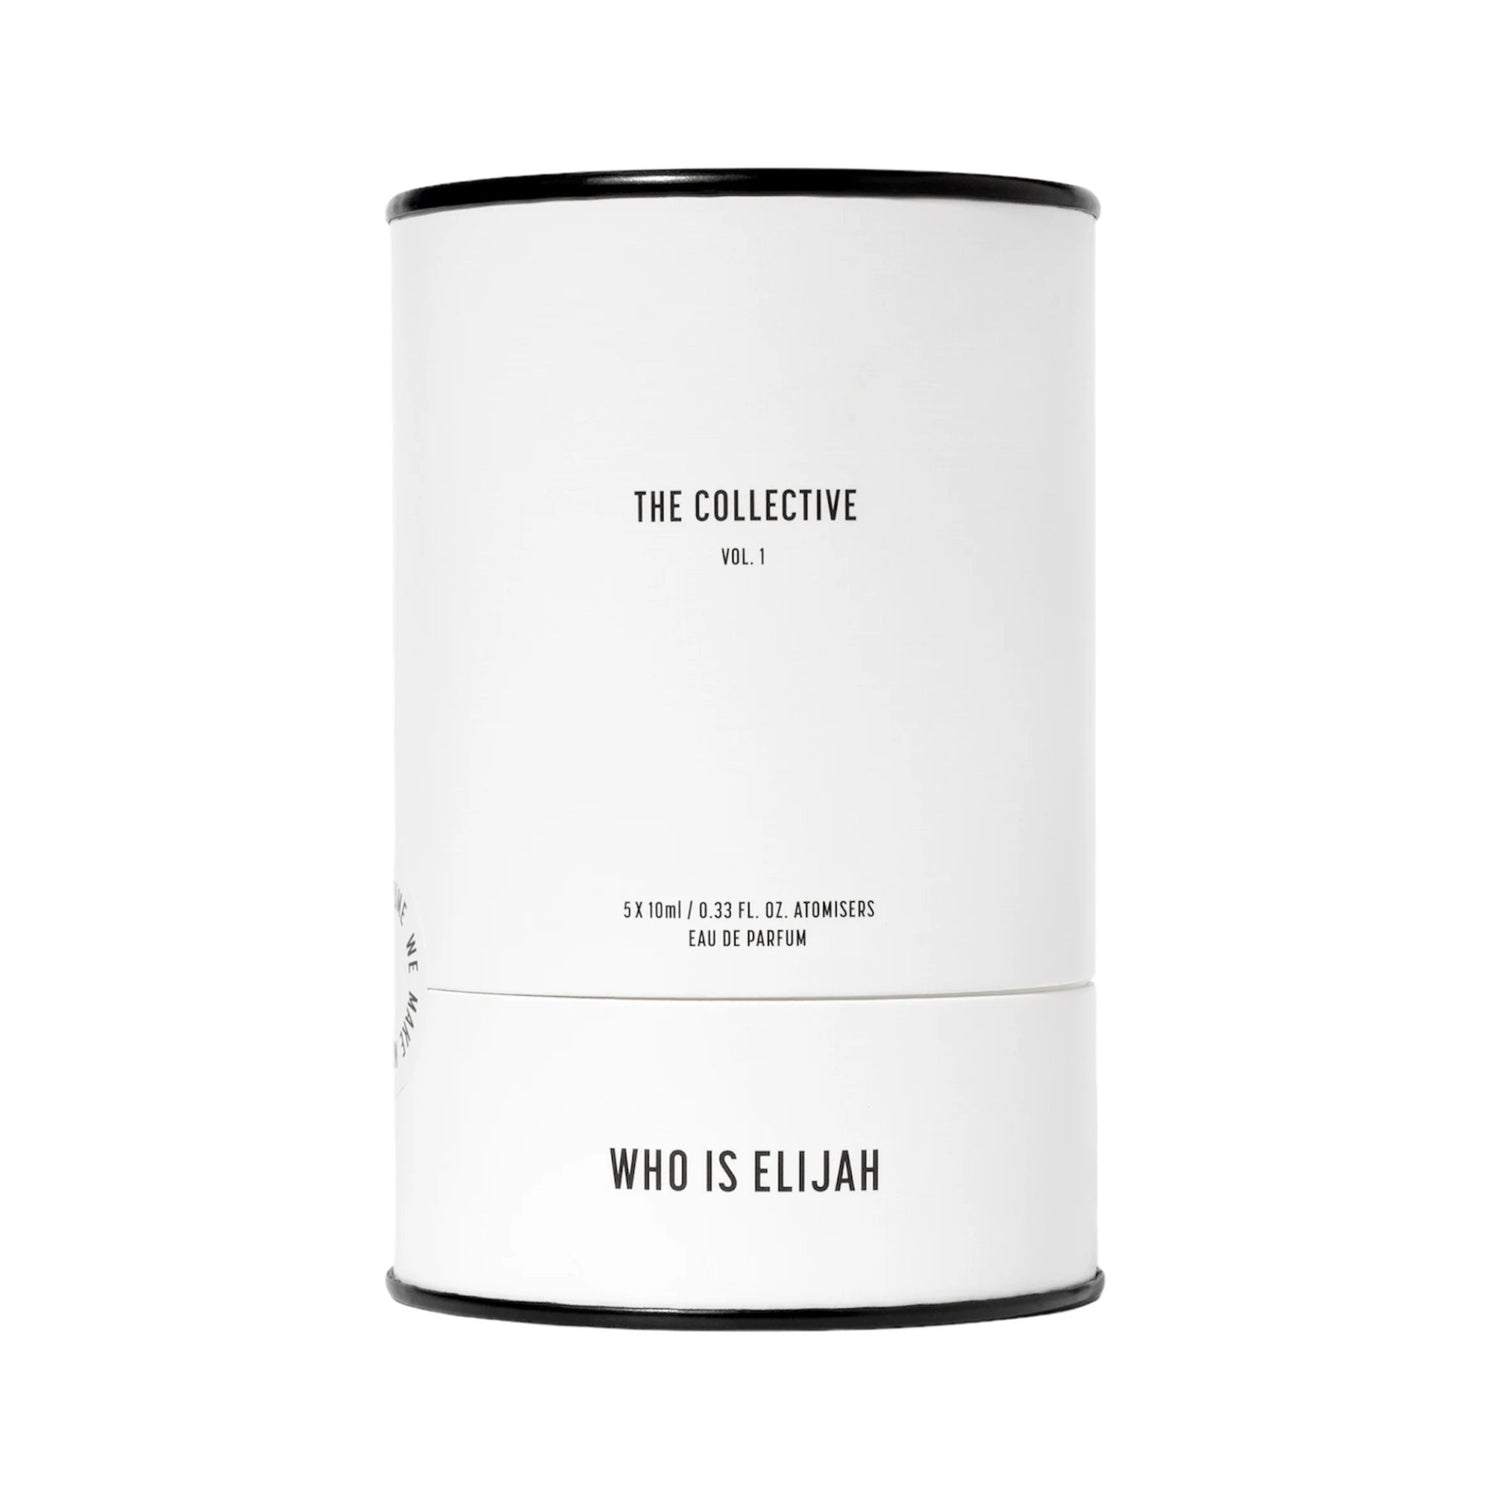 who is elijah The Collective Vol. 1